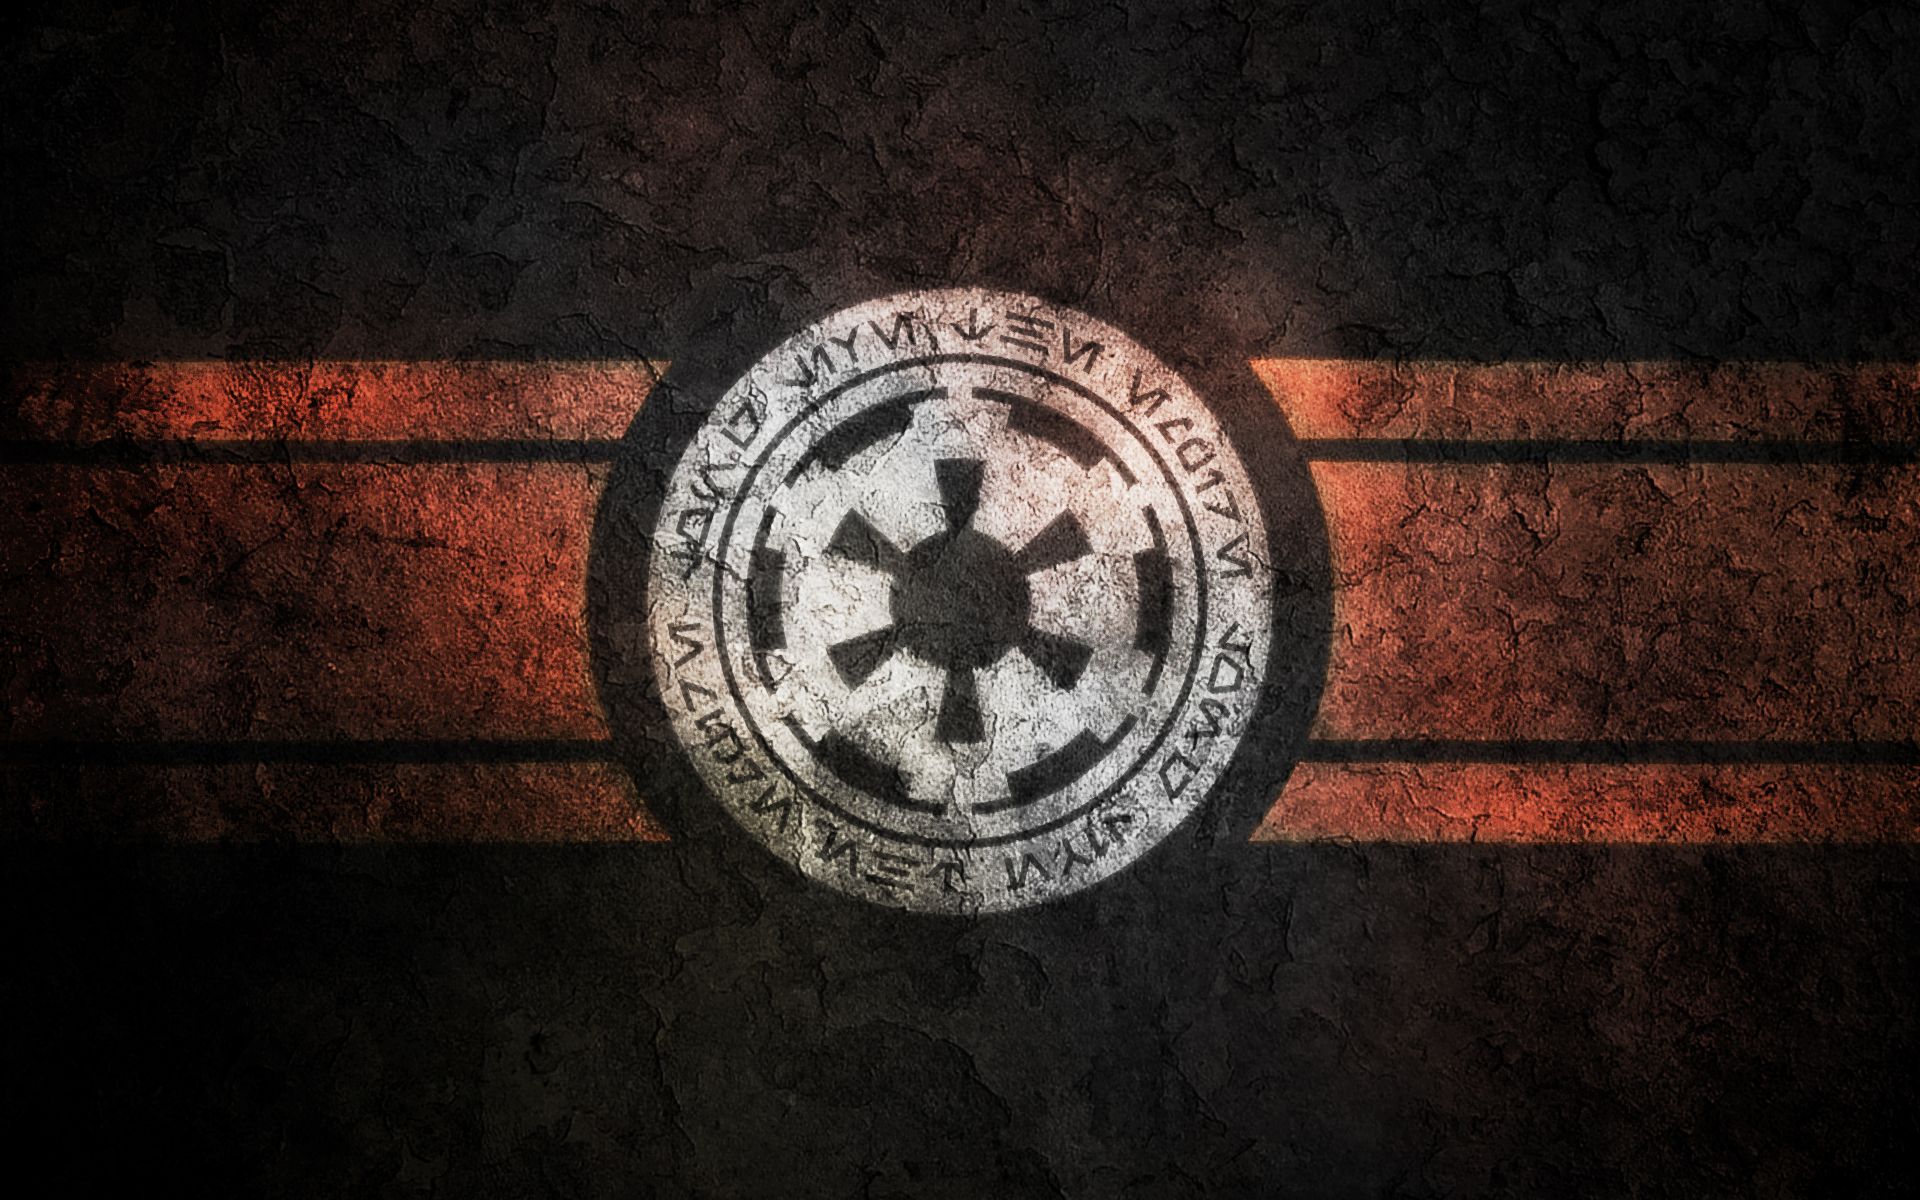 Star Wars Empire Wallpapers